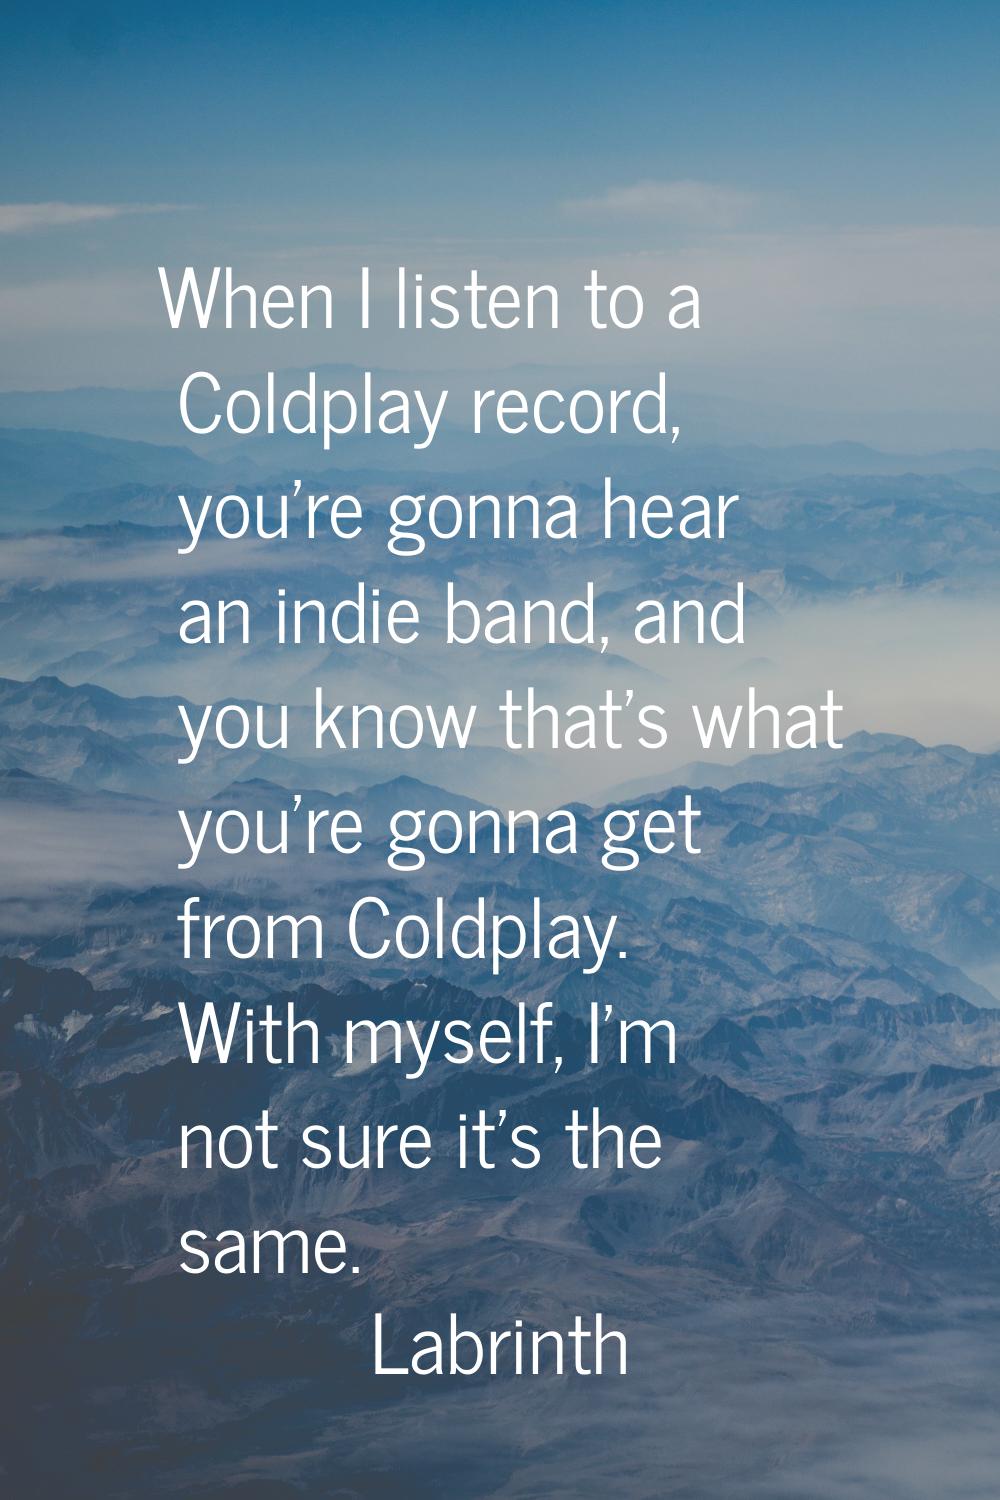 When I listen to a Coldplay record, you're gonna hear an indie band, and you know that's what you'r